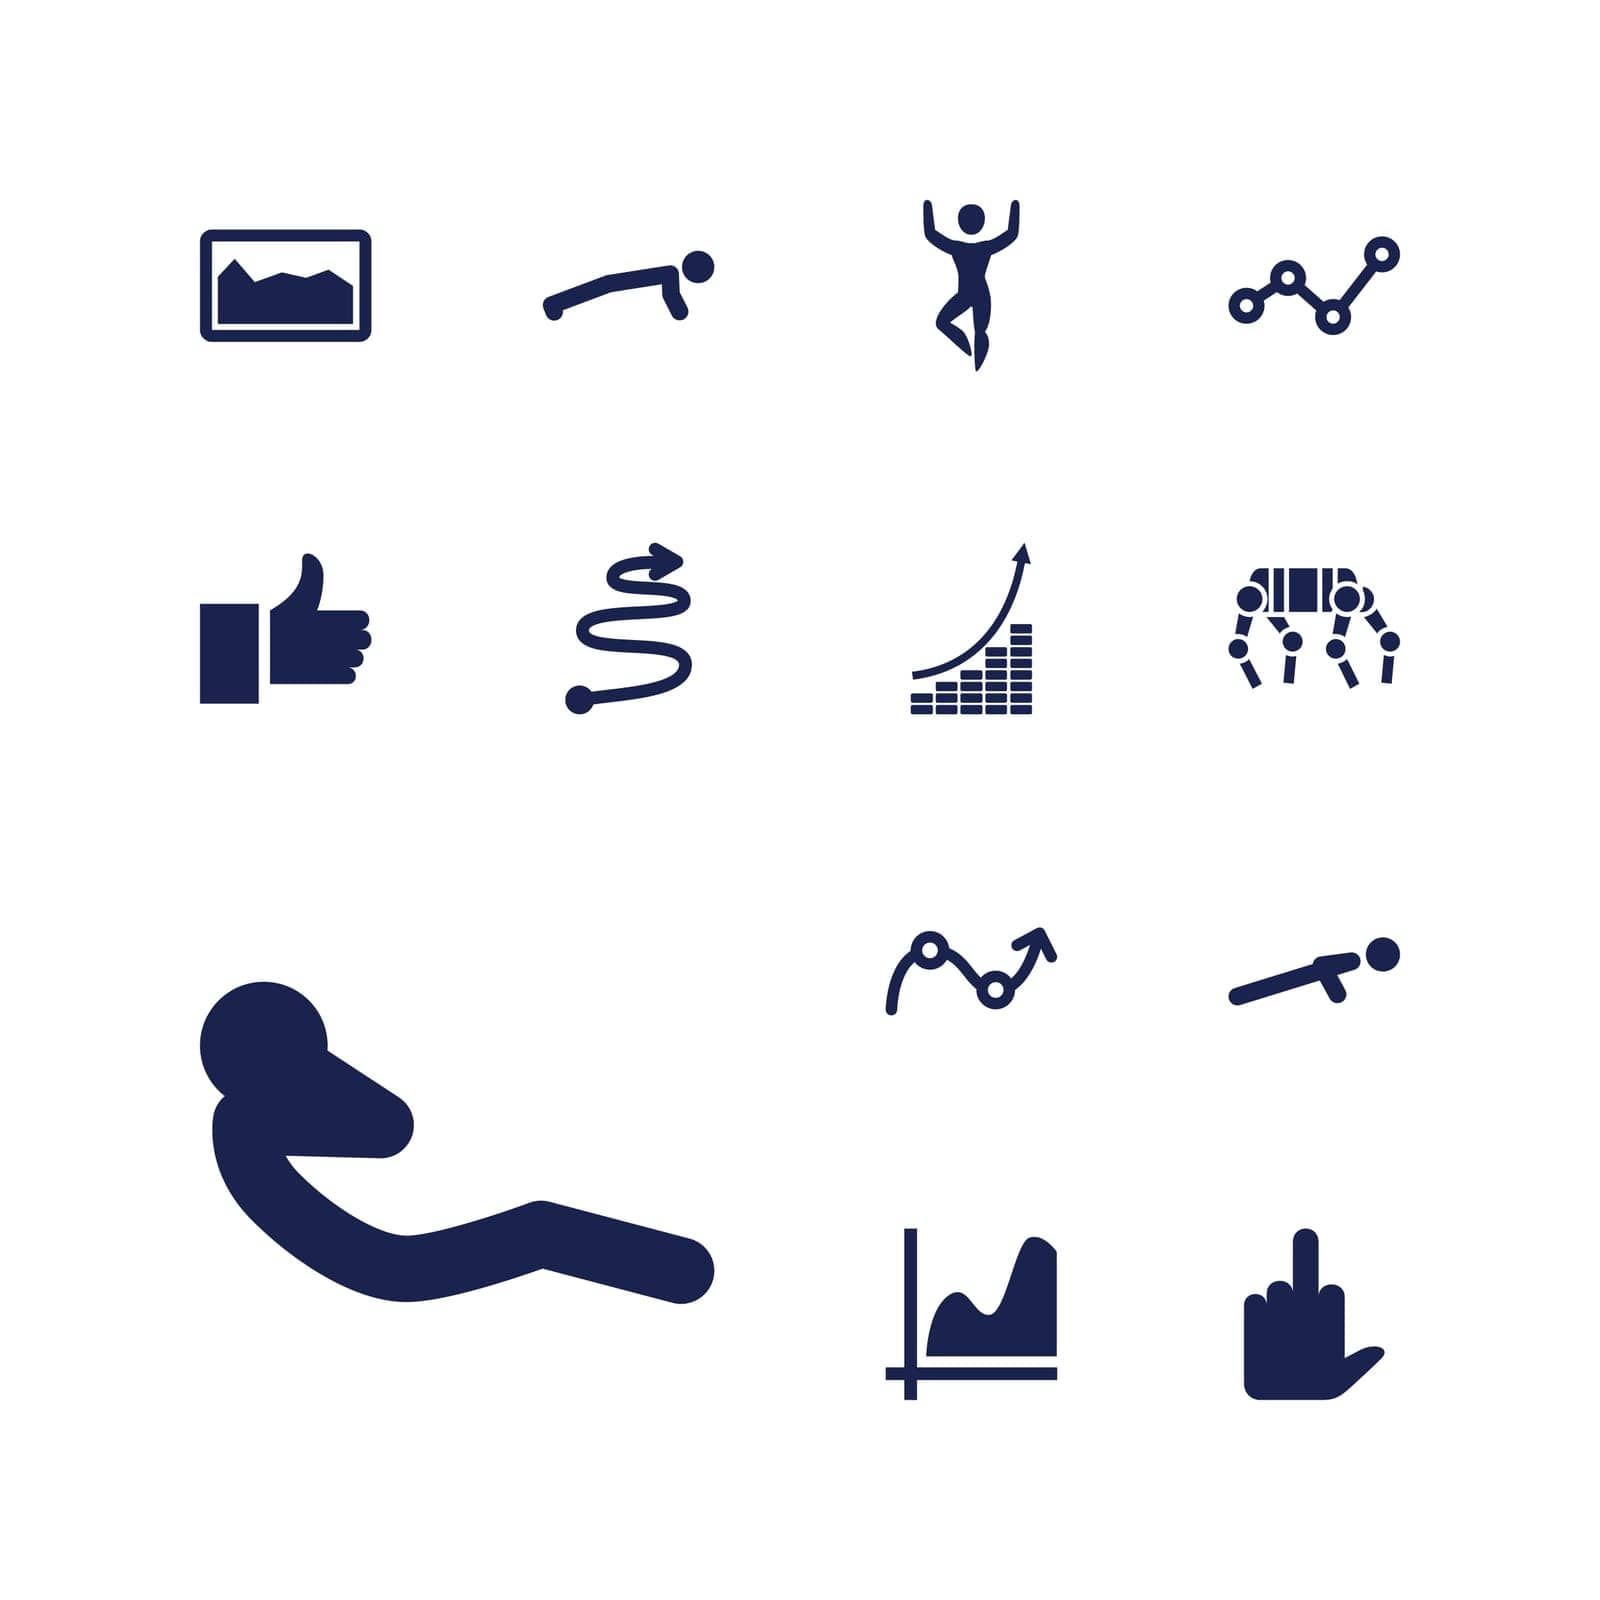 symbol,doing,curved,data,arrow,thumb,financial,concept,stairs,icon,sign,isolated,white,exercises,web,flat,design,vector,man,up,graphic,finger,set,middle,business,black,abdoninal,people,graph,push,money,workout,background,success,growth,illustration,chart,finance by ogqcorp